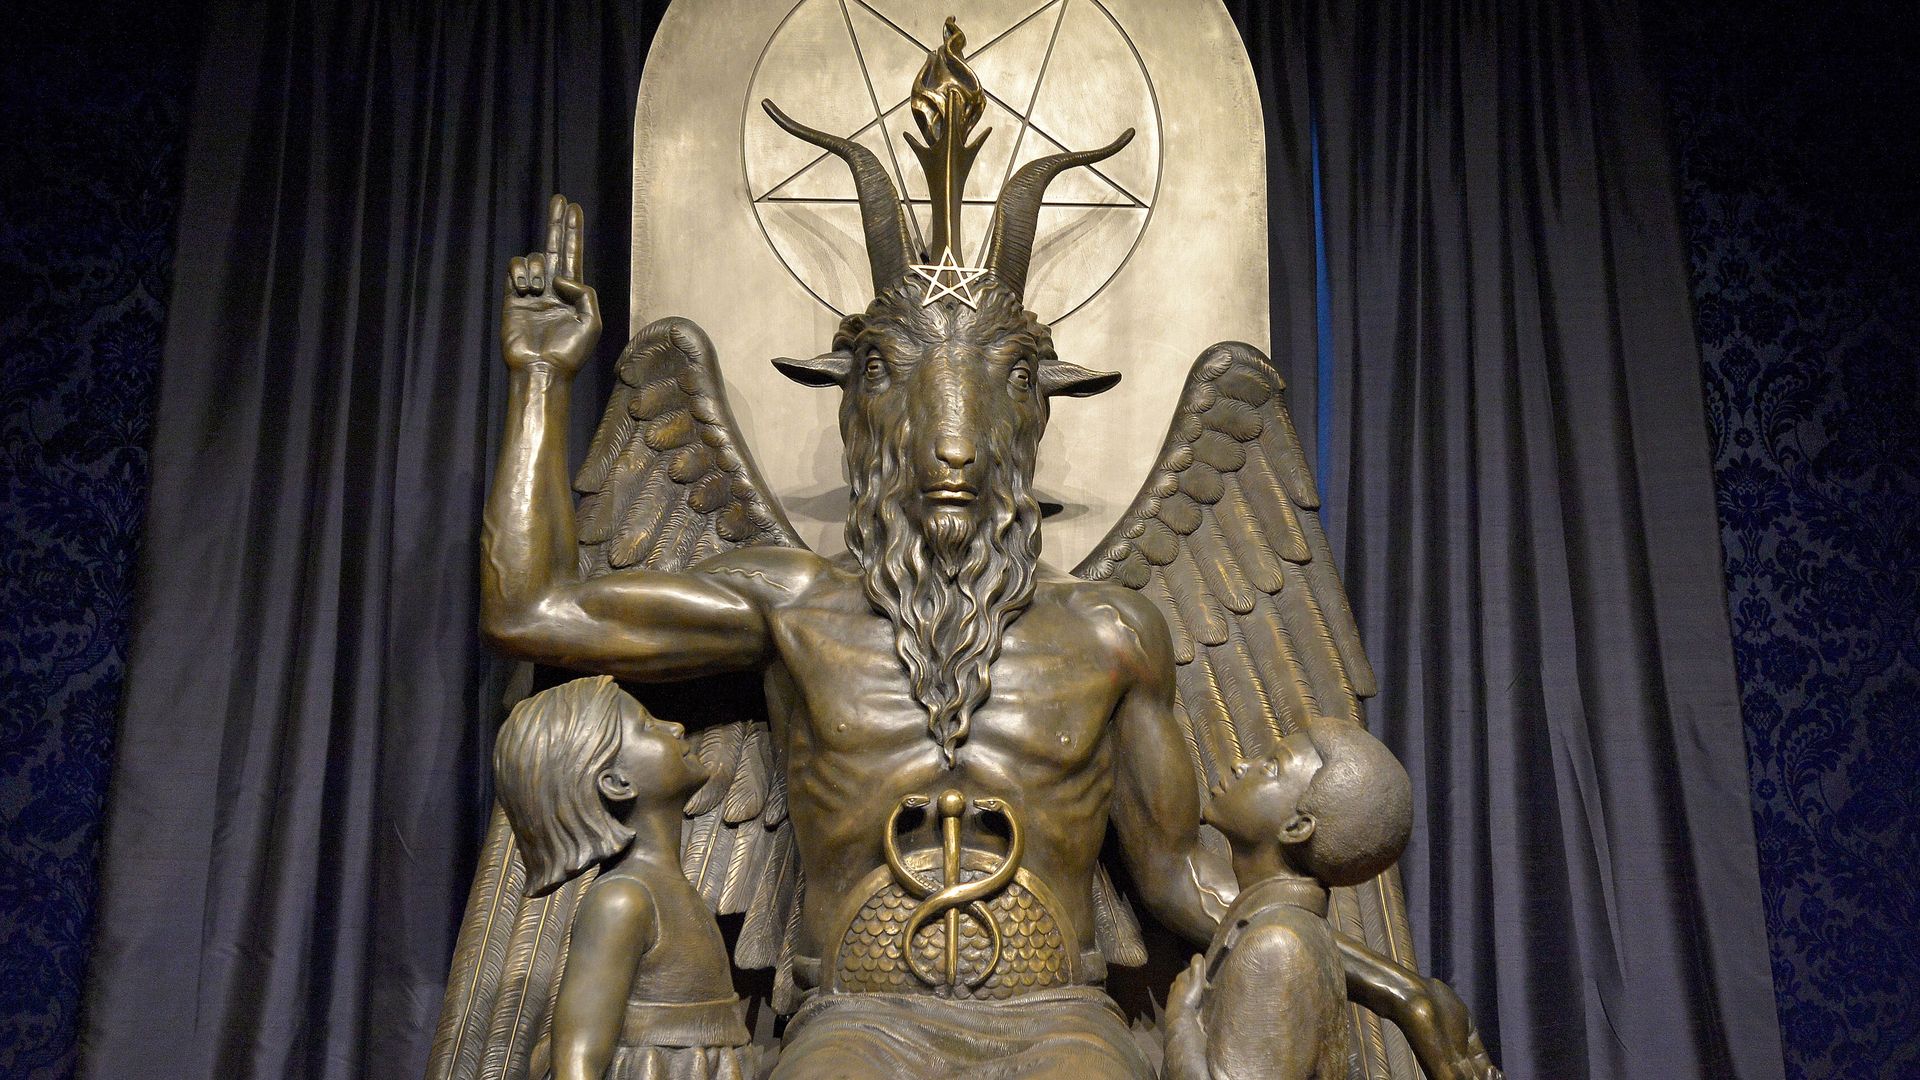 A statue of Baphomet, the goat-headed diety, at the Satanic Temple in Salem.